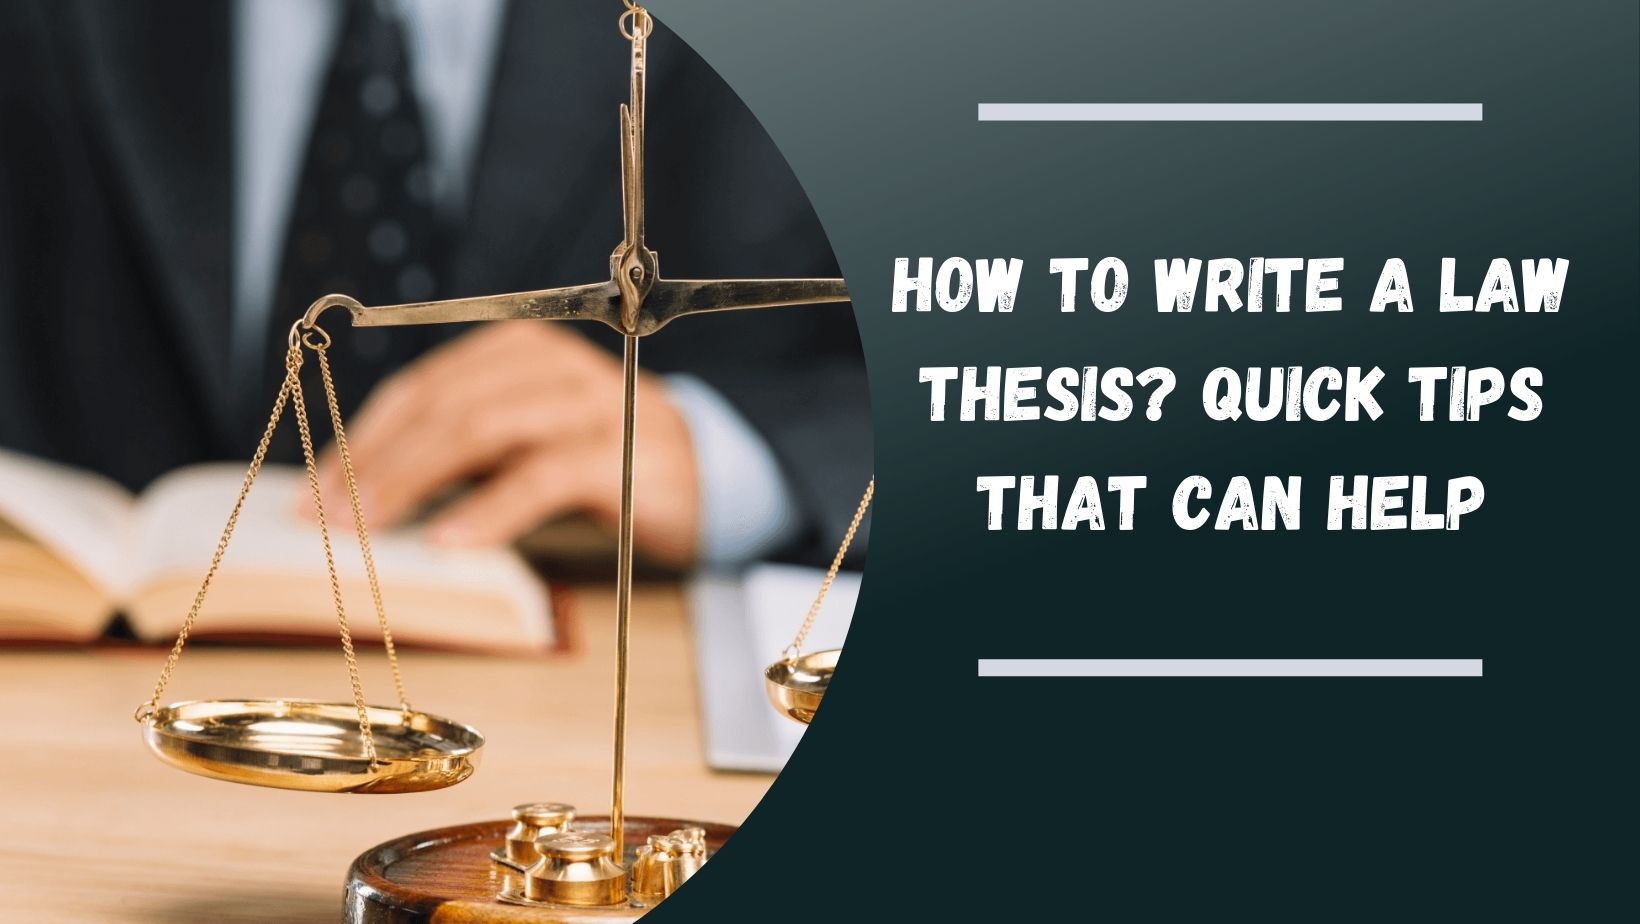 How to Write a Law Thesis? Quick Tips That Can Help